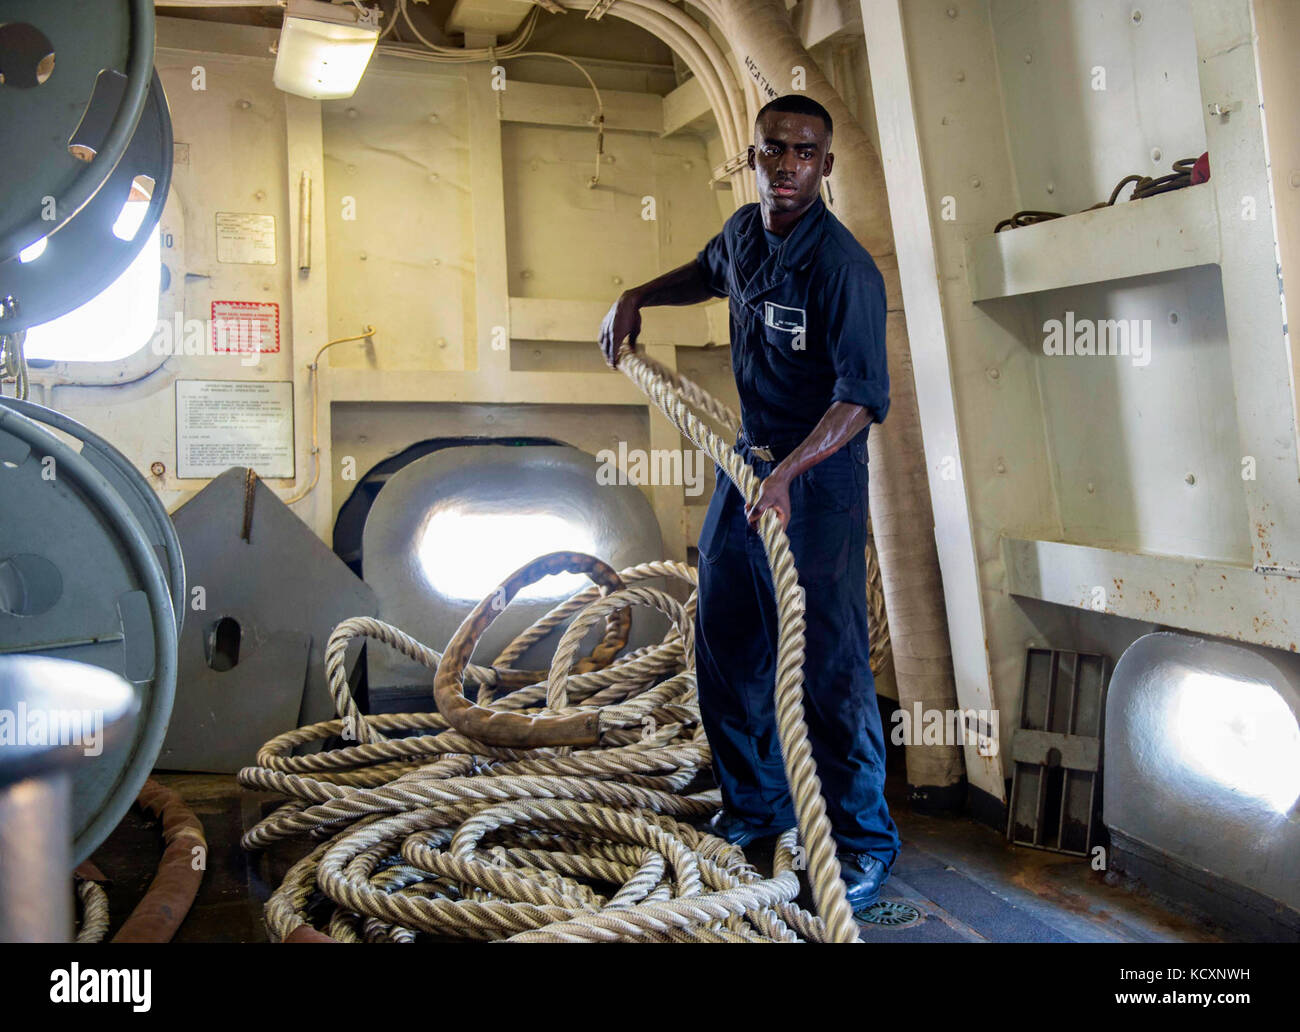 171007-N-YL073-0098   MAYPORT, Fla. (Oct. 7, 2017) Seaman Garry Tobias, a native of New Orleans, fakes a line during sea-and-anchor evolutions aboard the amphibious transport dock ship USS New York (LPD 21). New York departed Naval Station Mayport, Florida, to support the Gulf coast region in the event assistance is needed in the wake of Hurricane Nate. (U.S. Navy photo by Mass Communication Specialist 1st Class Shamira Purifoy/Released) Stock Photo